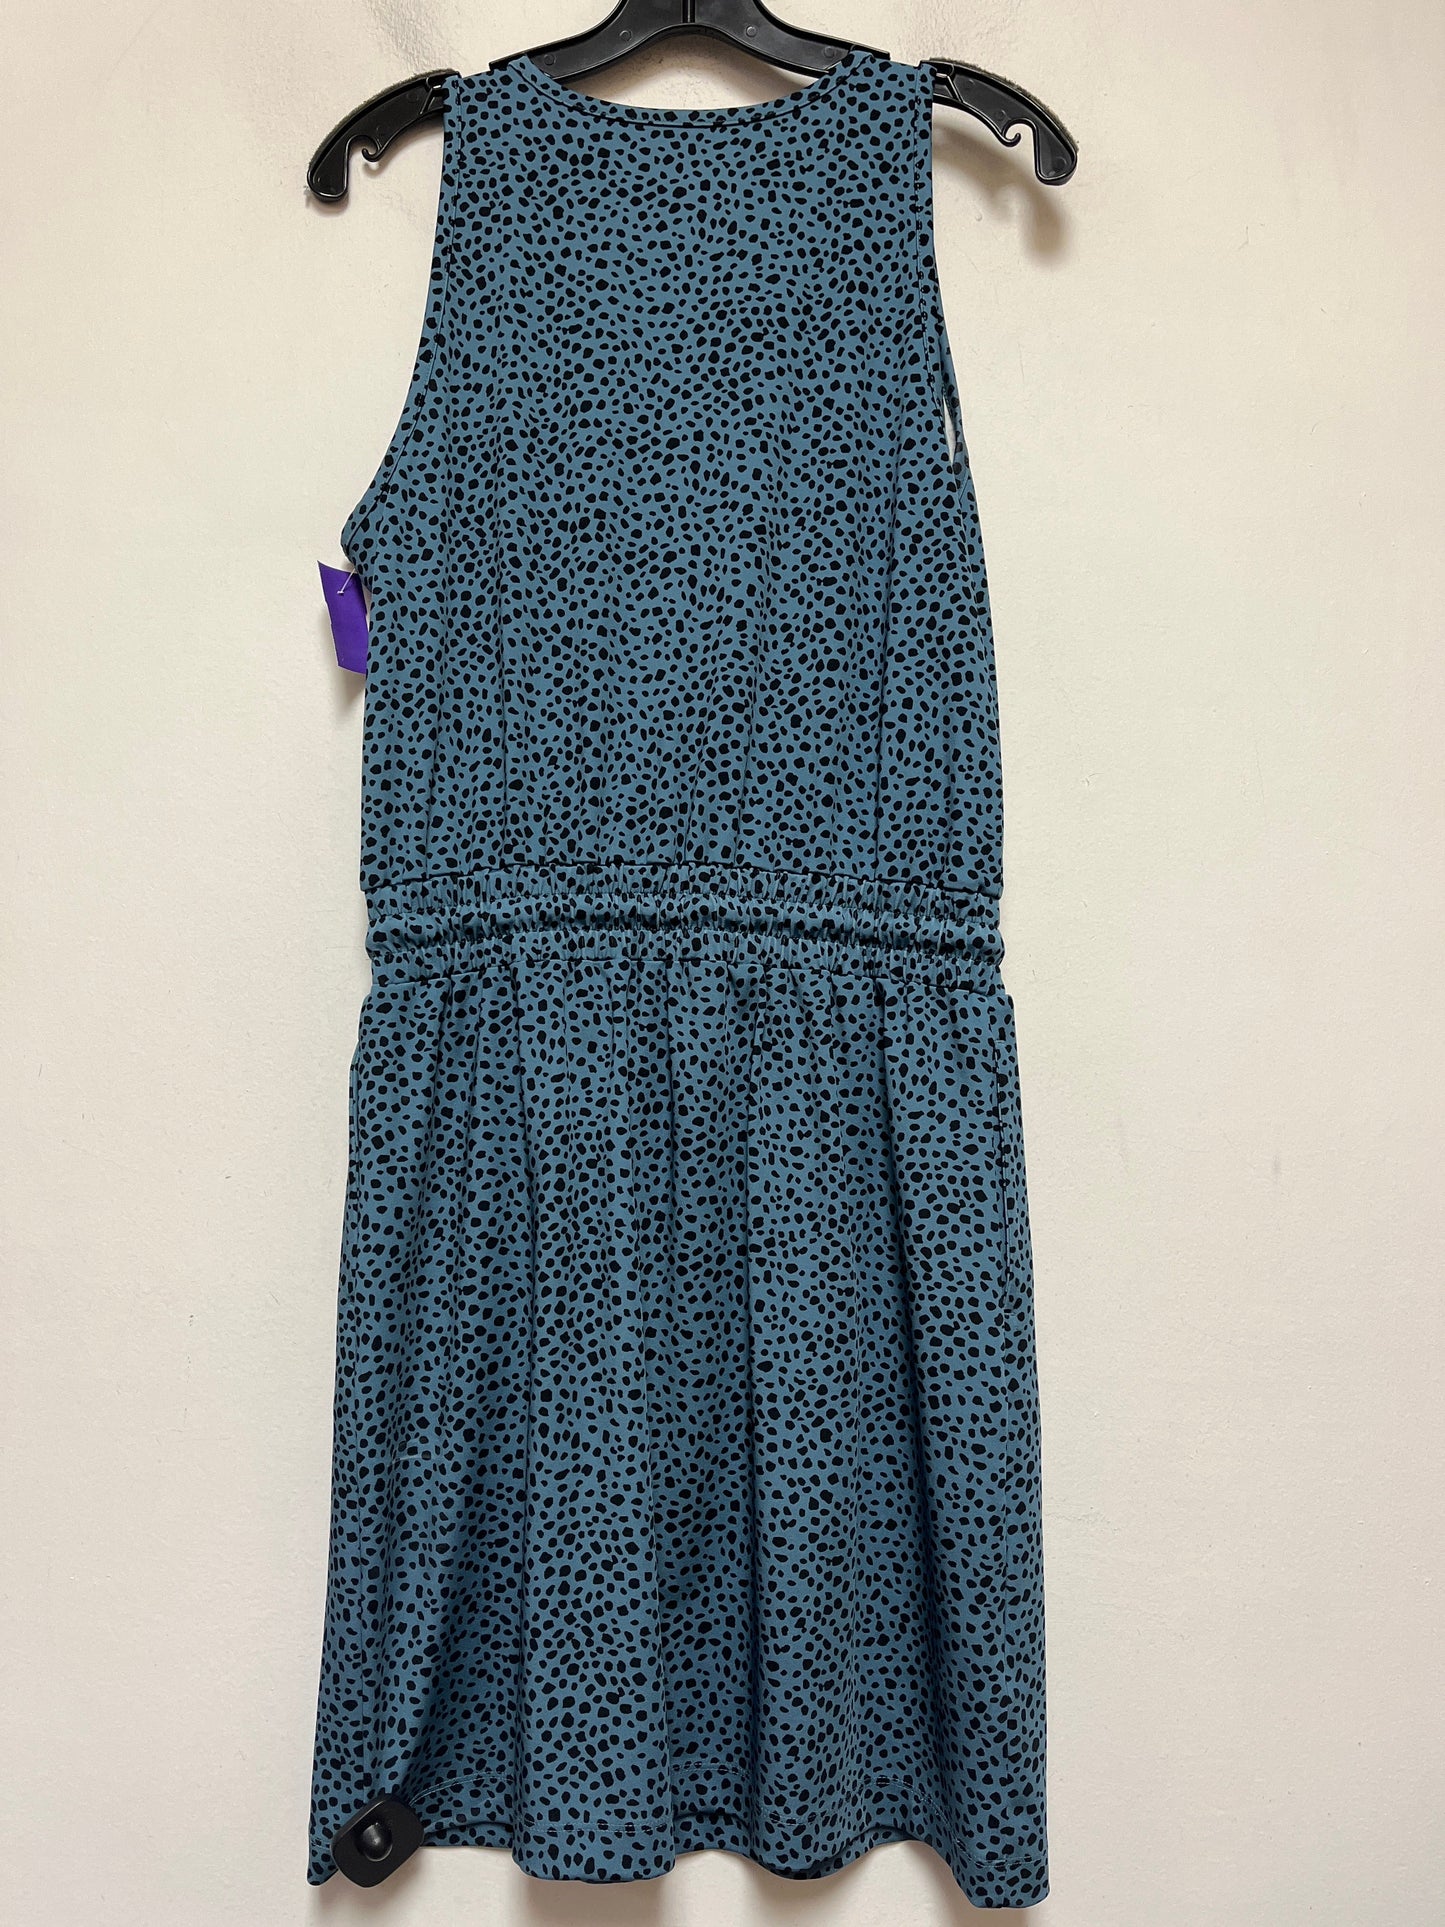 Black & Blue Dress Casual Short Lou And Grey, Size Xs